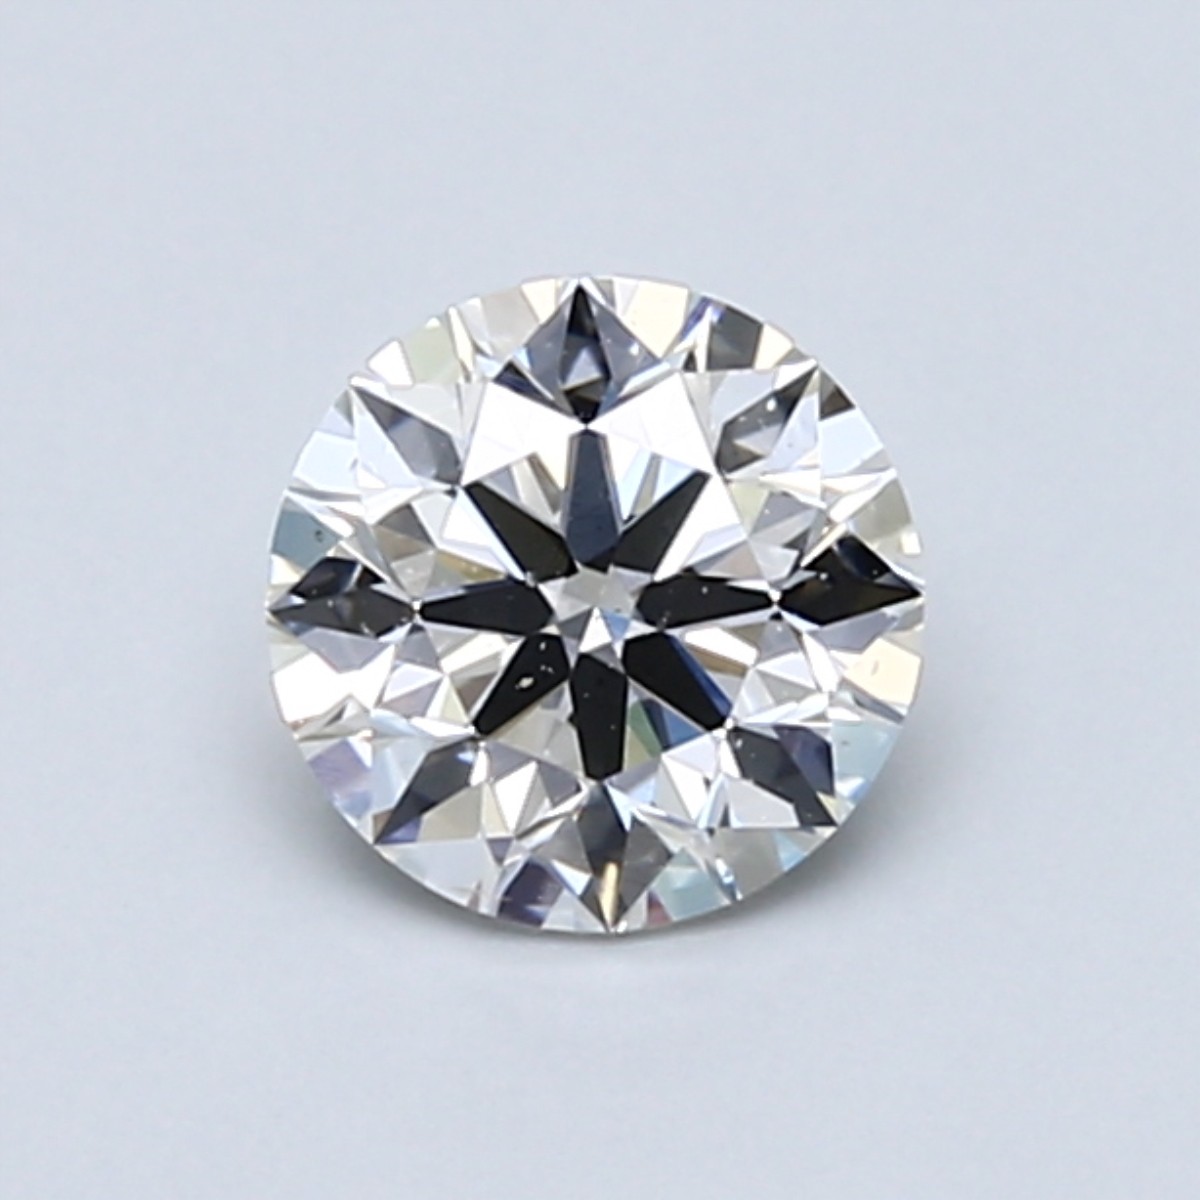 Round 0.8 Carat H Color SI1 Clarity For Sale